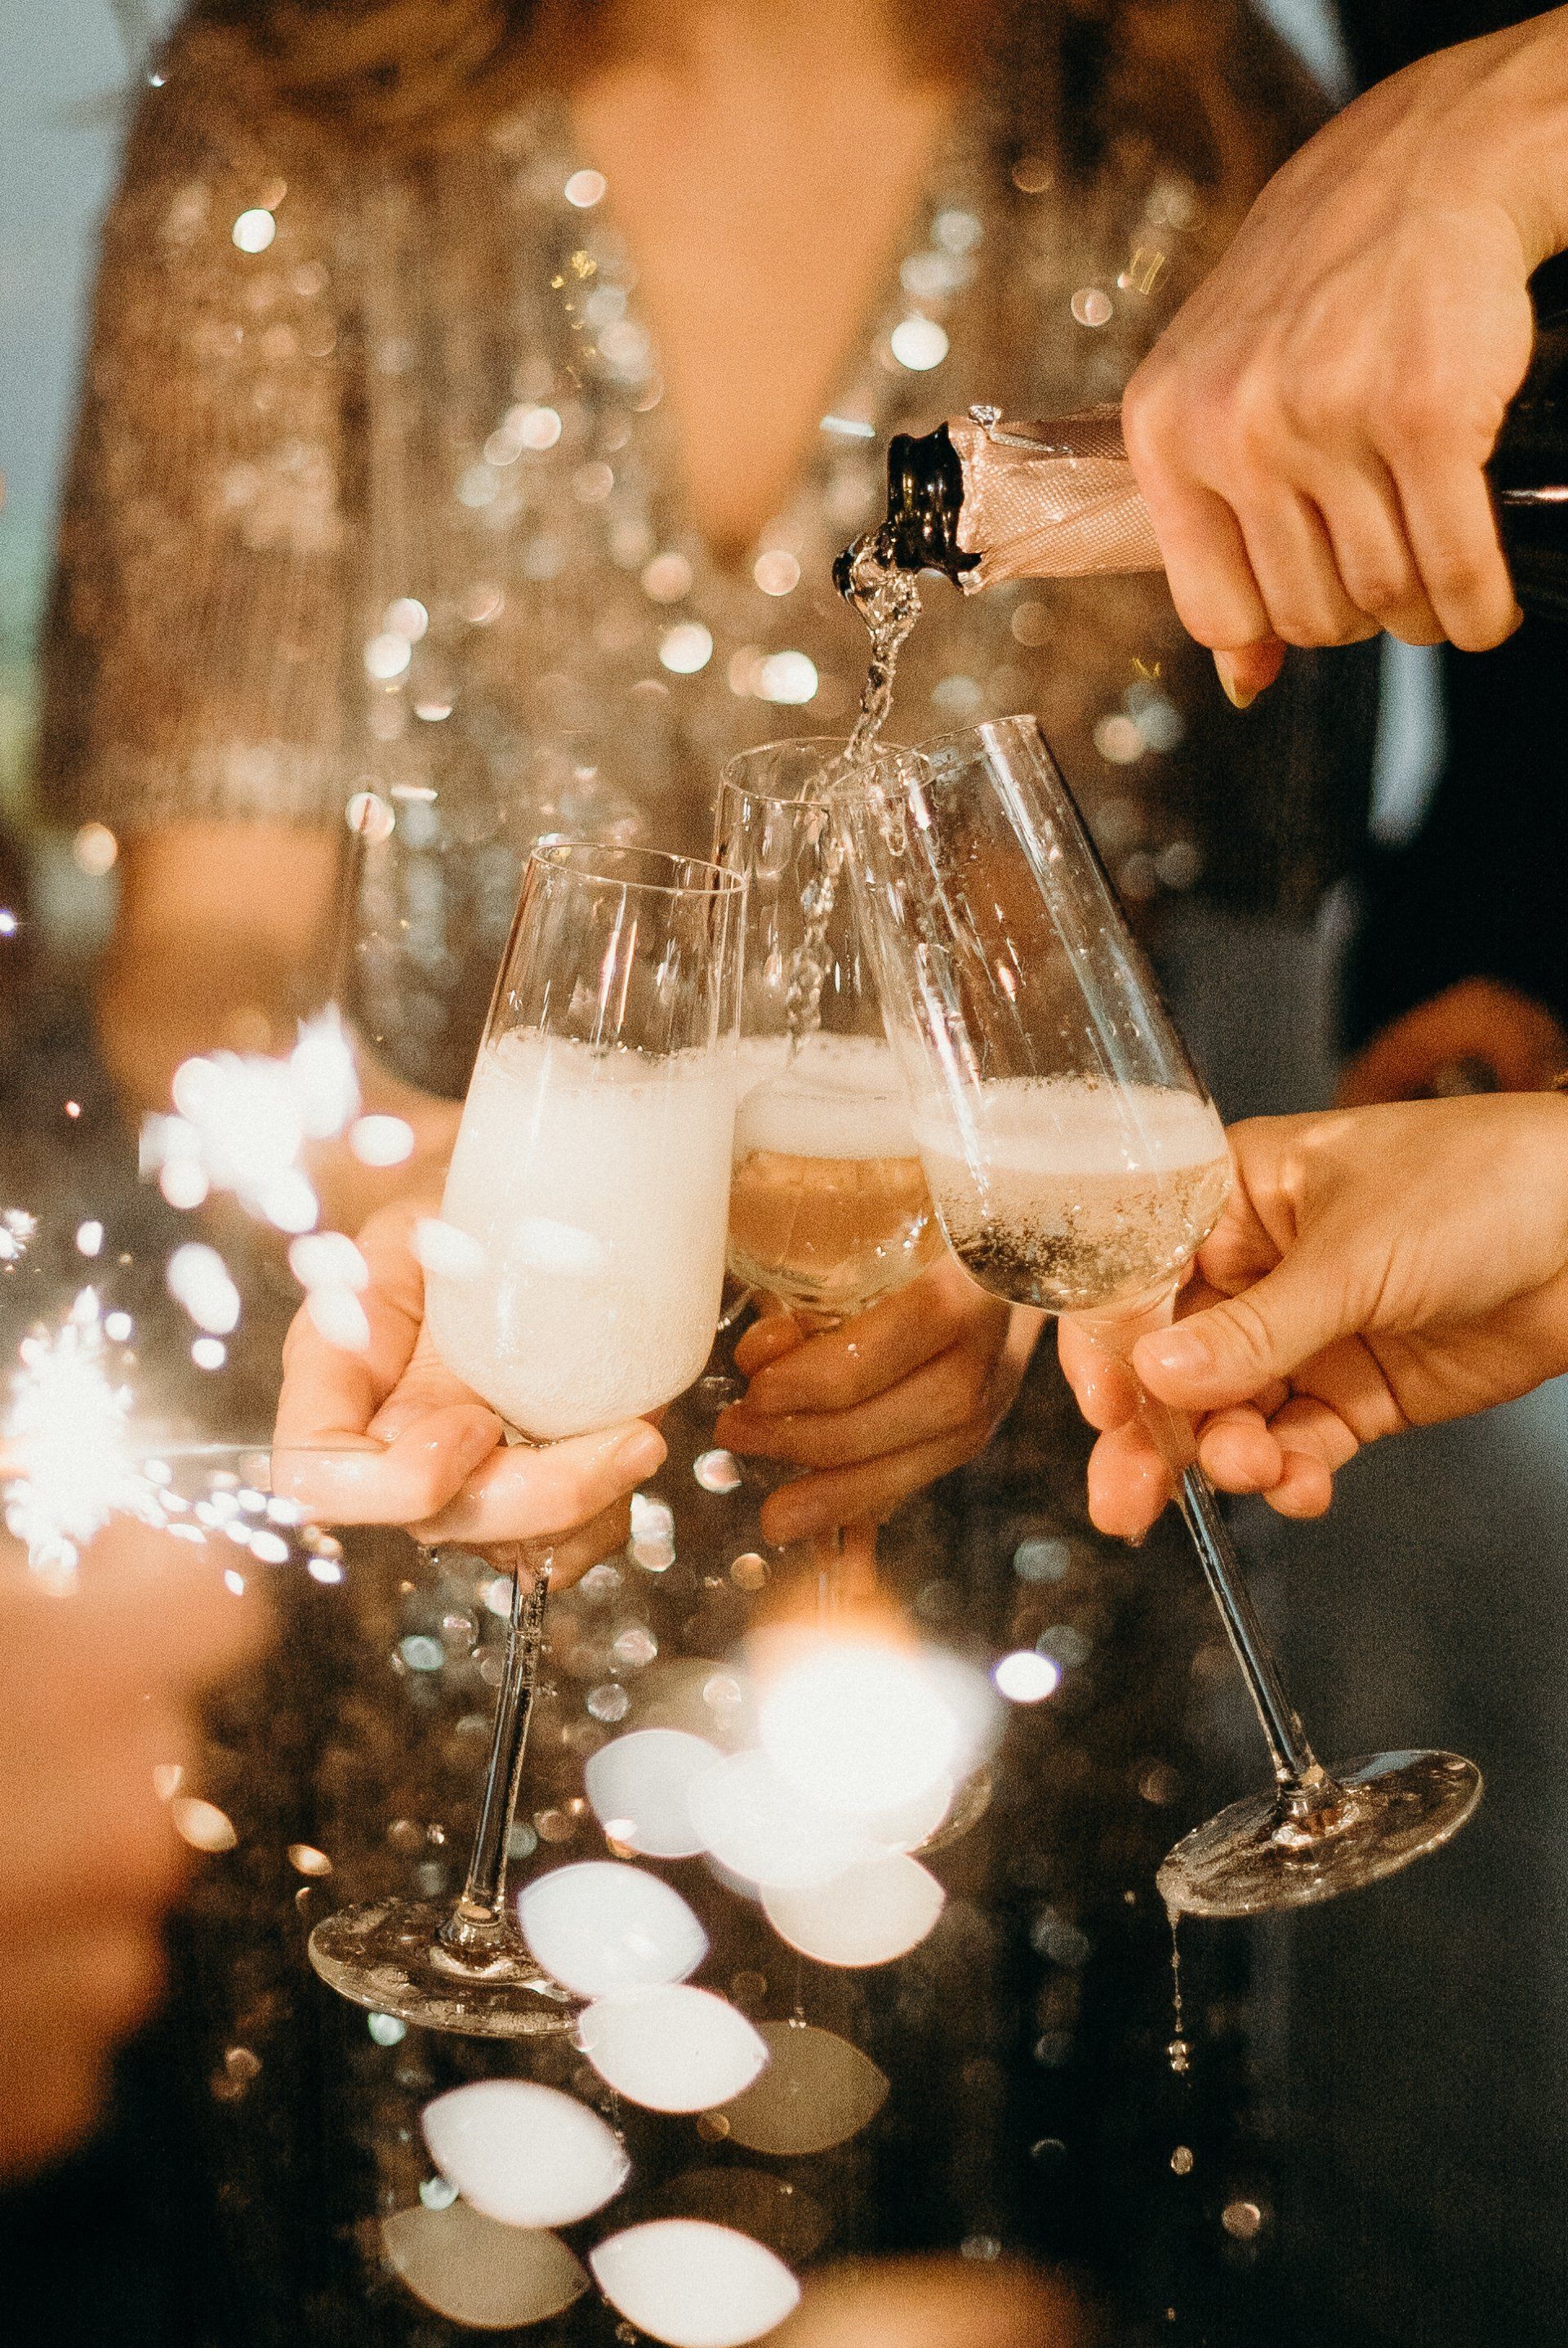 A group of people are pouring champagne into glasses